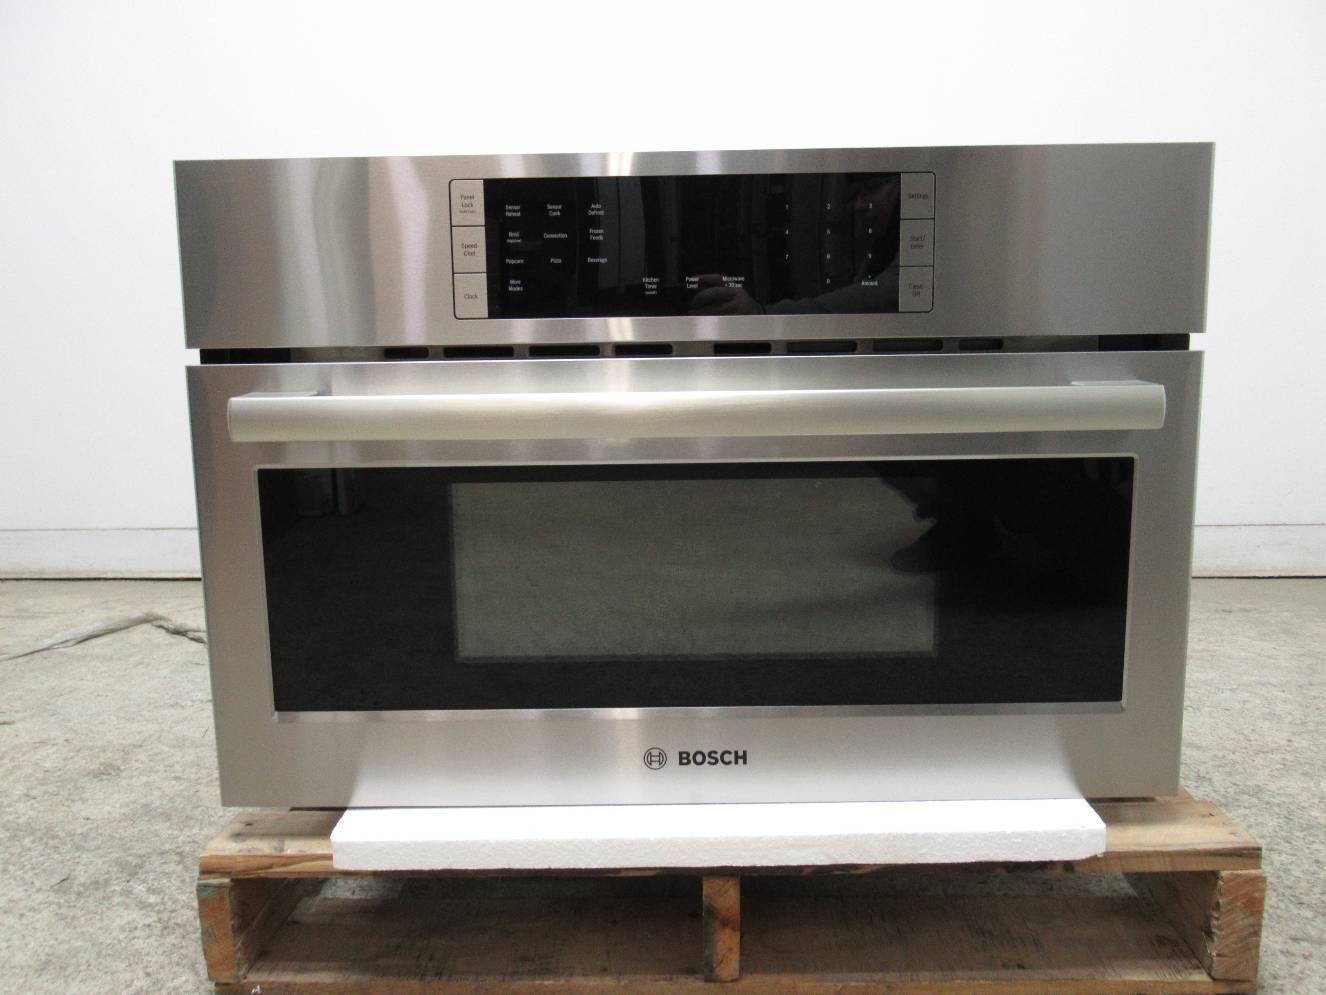 Bosch 30" 1.6 Cu. Ft.10 Levels 2in1 microwave Stainless